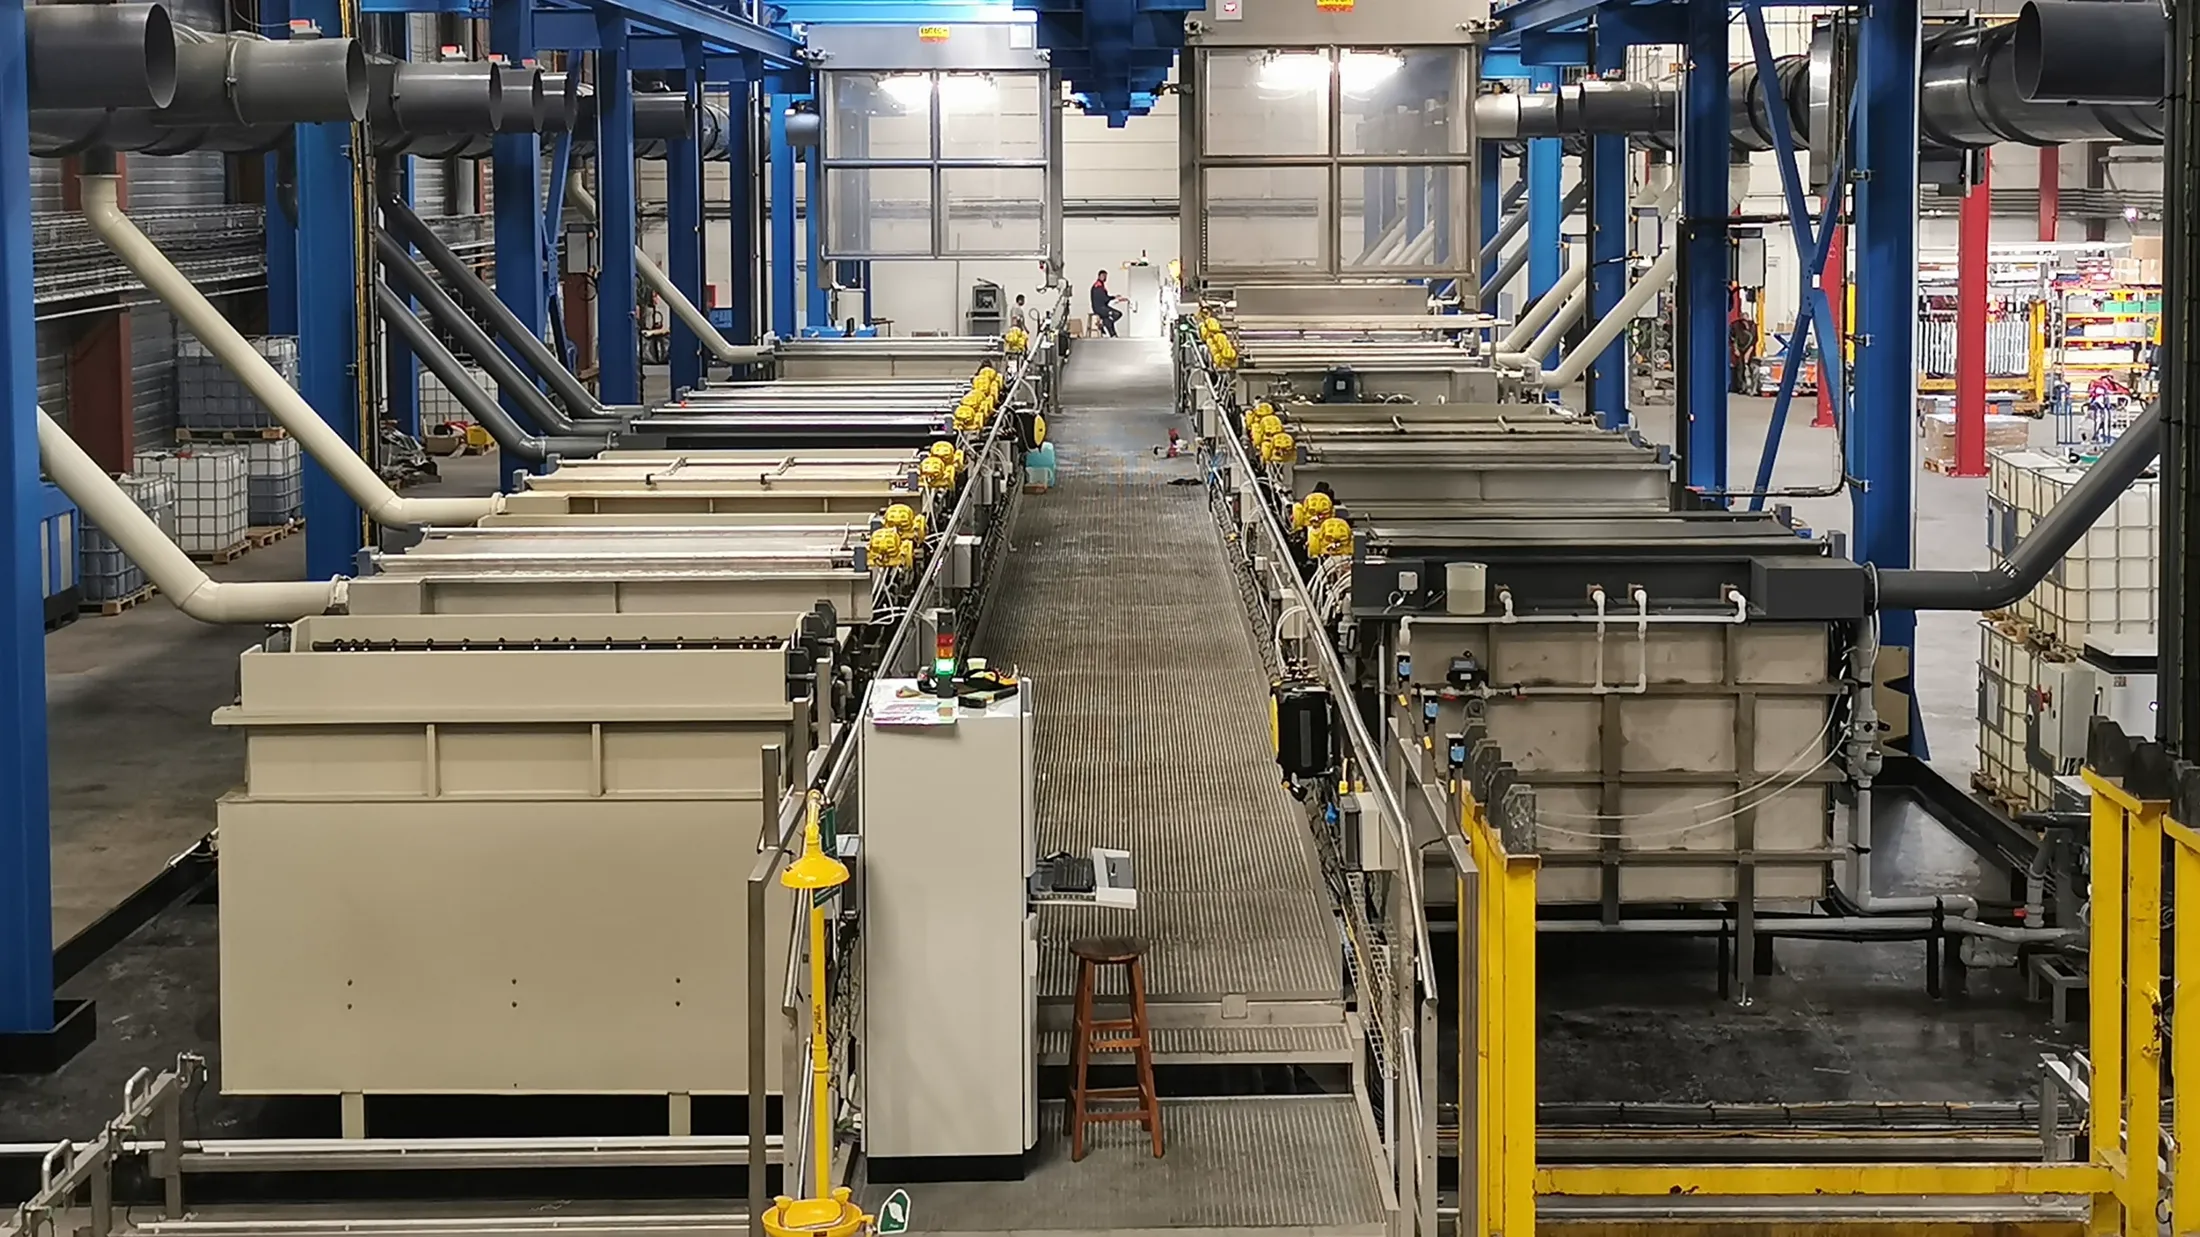 Our fully automated and robotic production line. This overview illustrates the efficiency of our process, where automated systems and robots ensure precision and consistency at every step of production. Our commitment to automation strengthens our ability to provide high-quality surface treatment solutions efficiently.